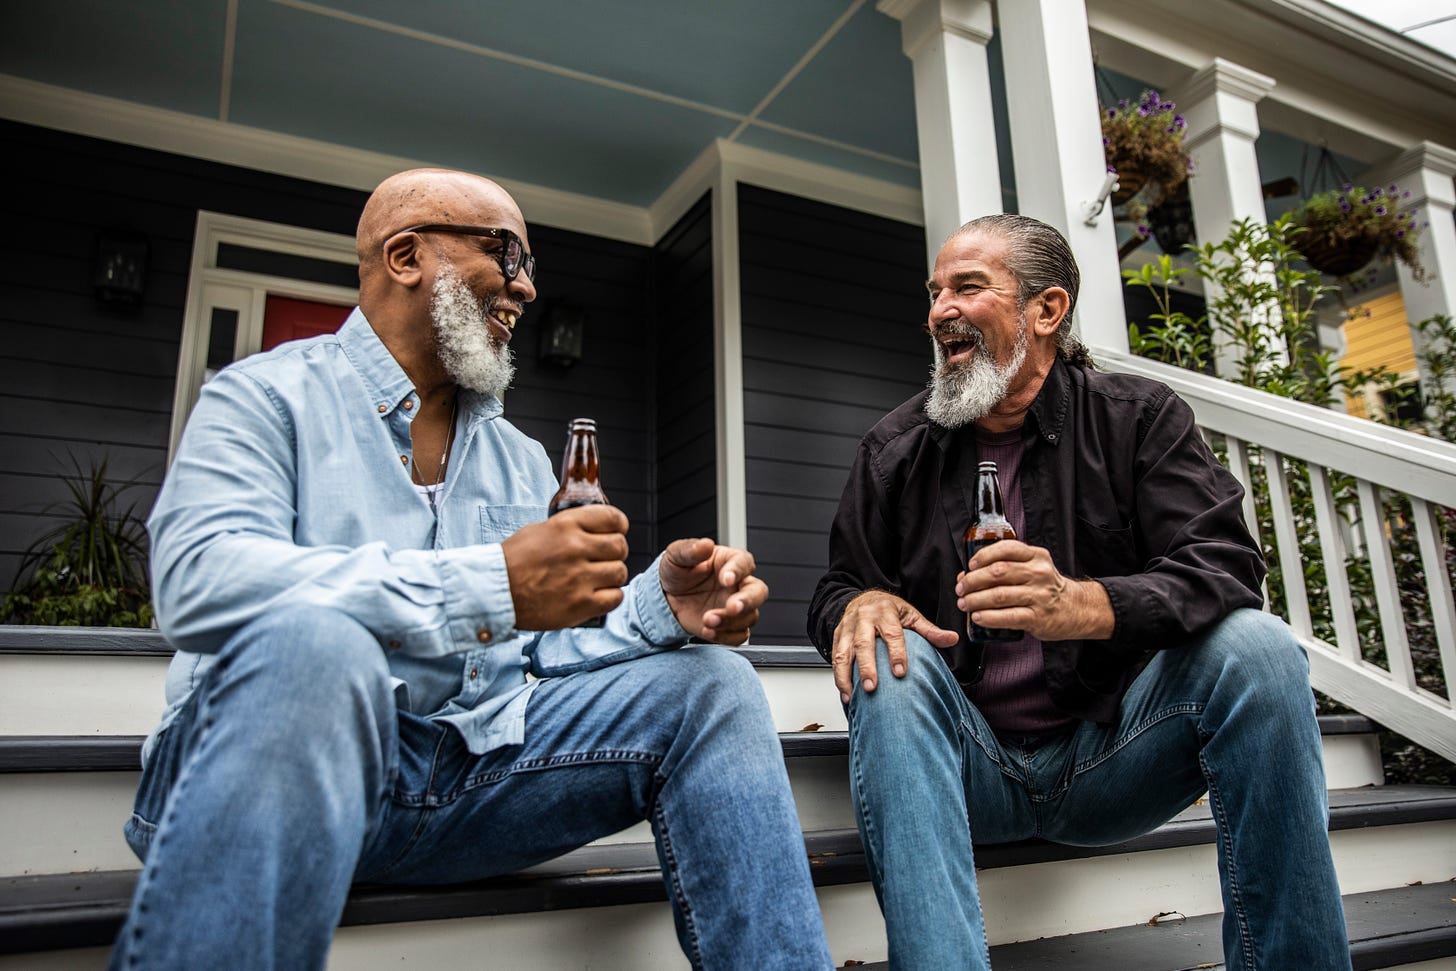 Hudson says we can increase civility with small individual actions, like talking to the neighbors on our front porches. Image Credit: MoMo Productions/Getty Images